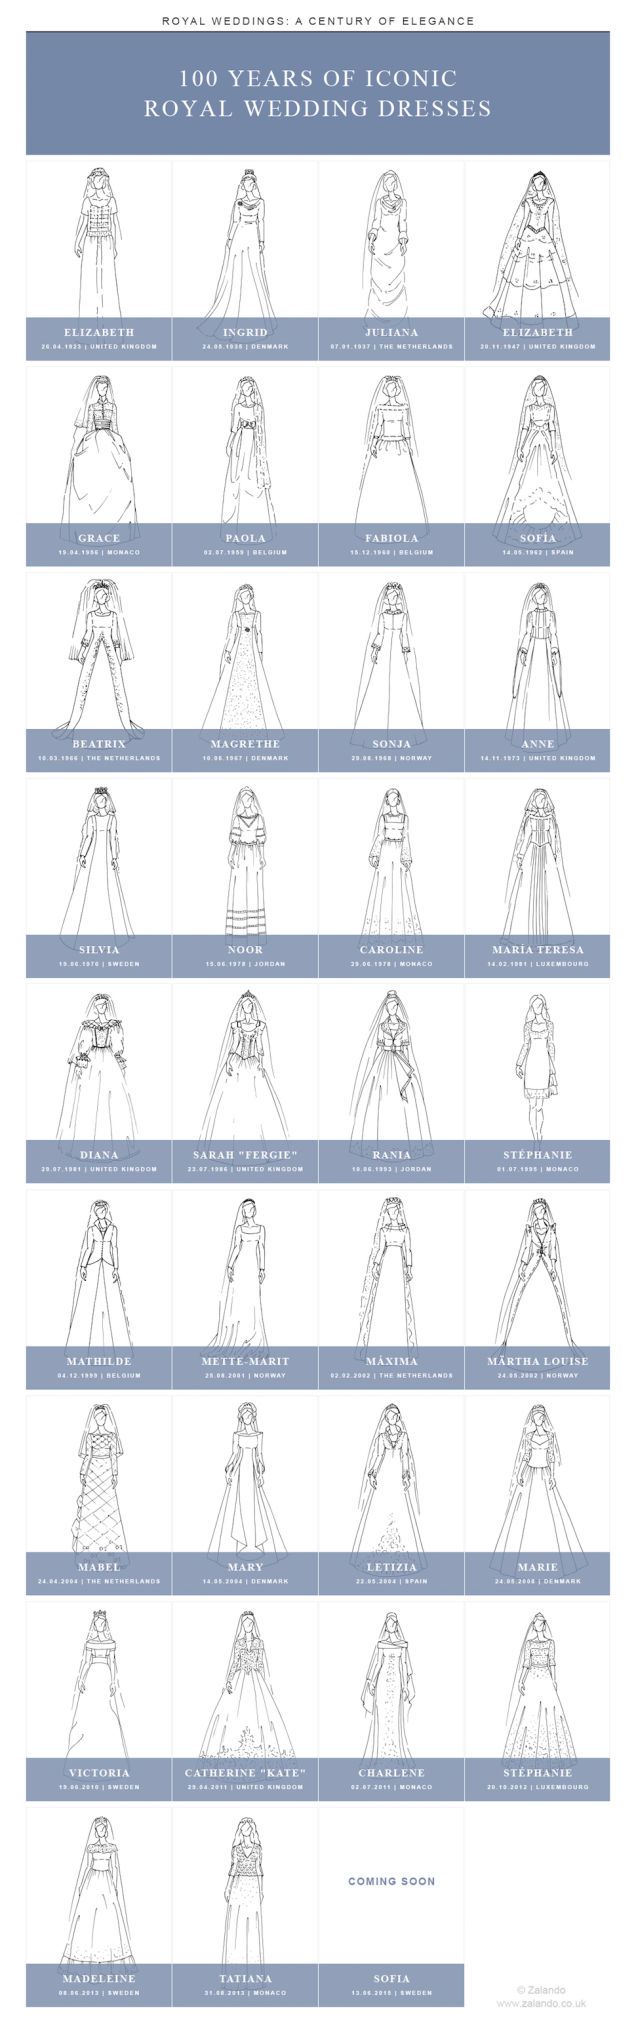 100 years of iconic royal wedding dresses infographic